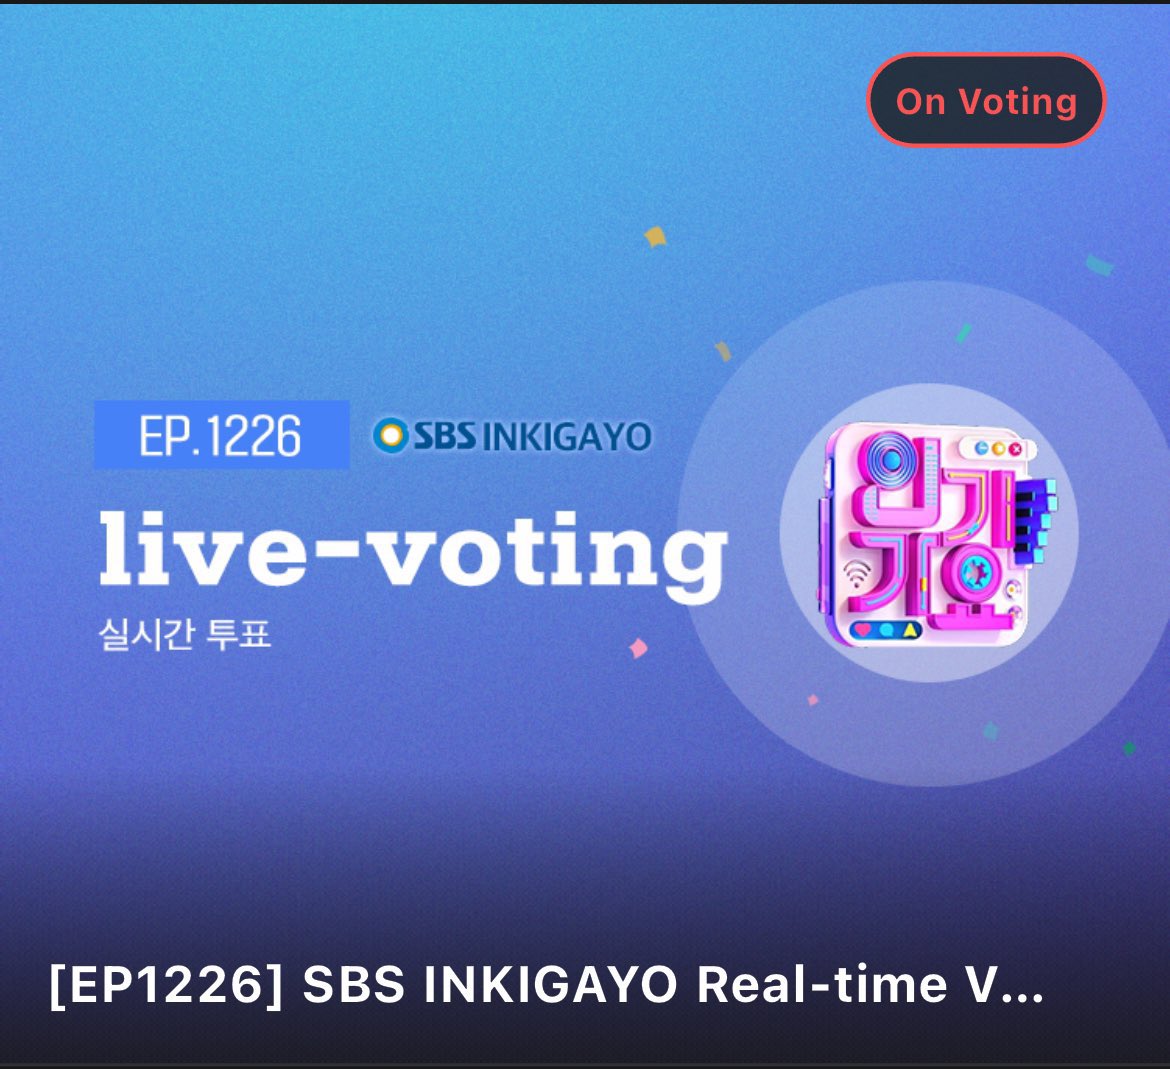 🗳 🚨INKIGAYO LIVE VOTING🚨 - Download Superstar X on your phone! - Use all of your ruburs to vote - Buy rubies if you have extra money! WE SHOULD NOT BECOME COMPLACENT BAEMOVILLE! #BABYMONSTER #베이비몬스터 @YGBABYMONSTER_